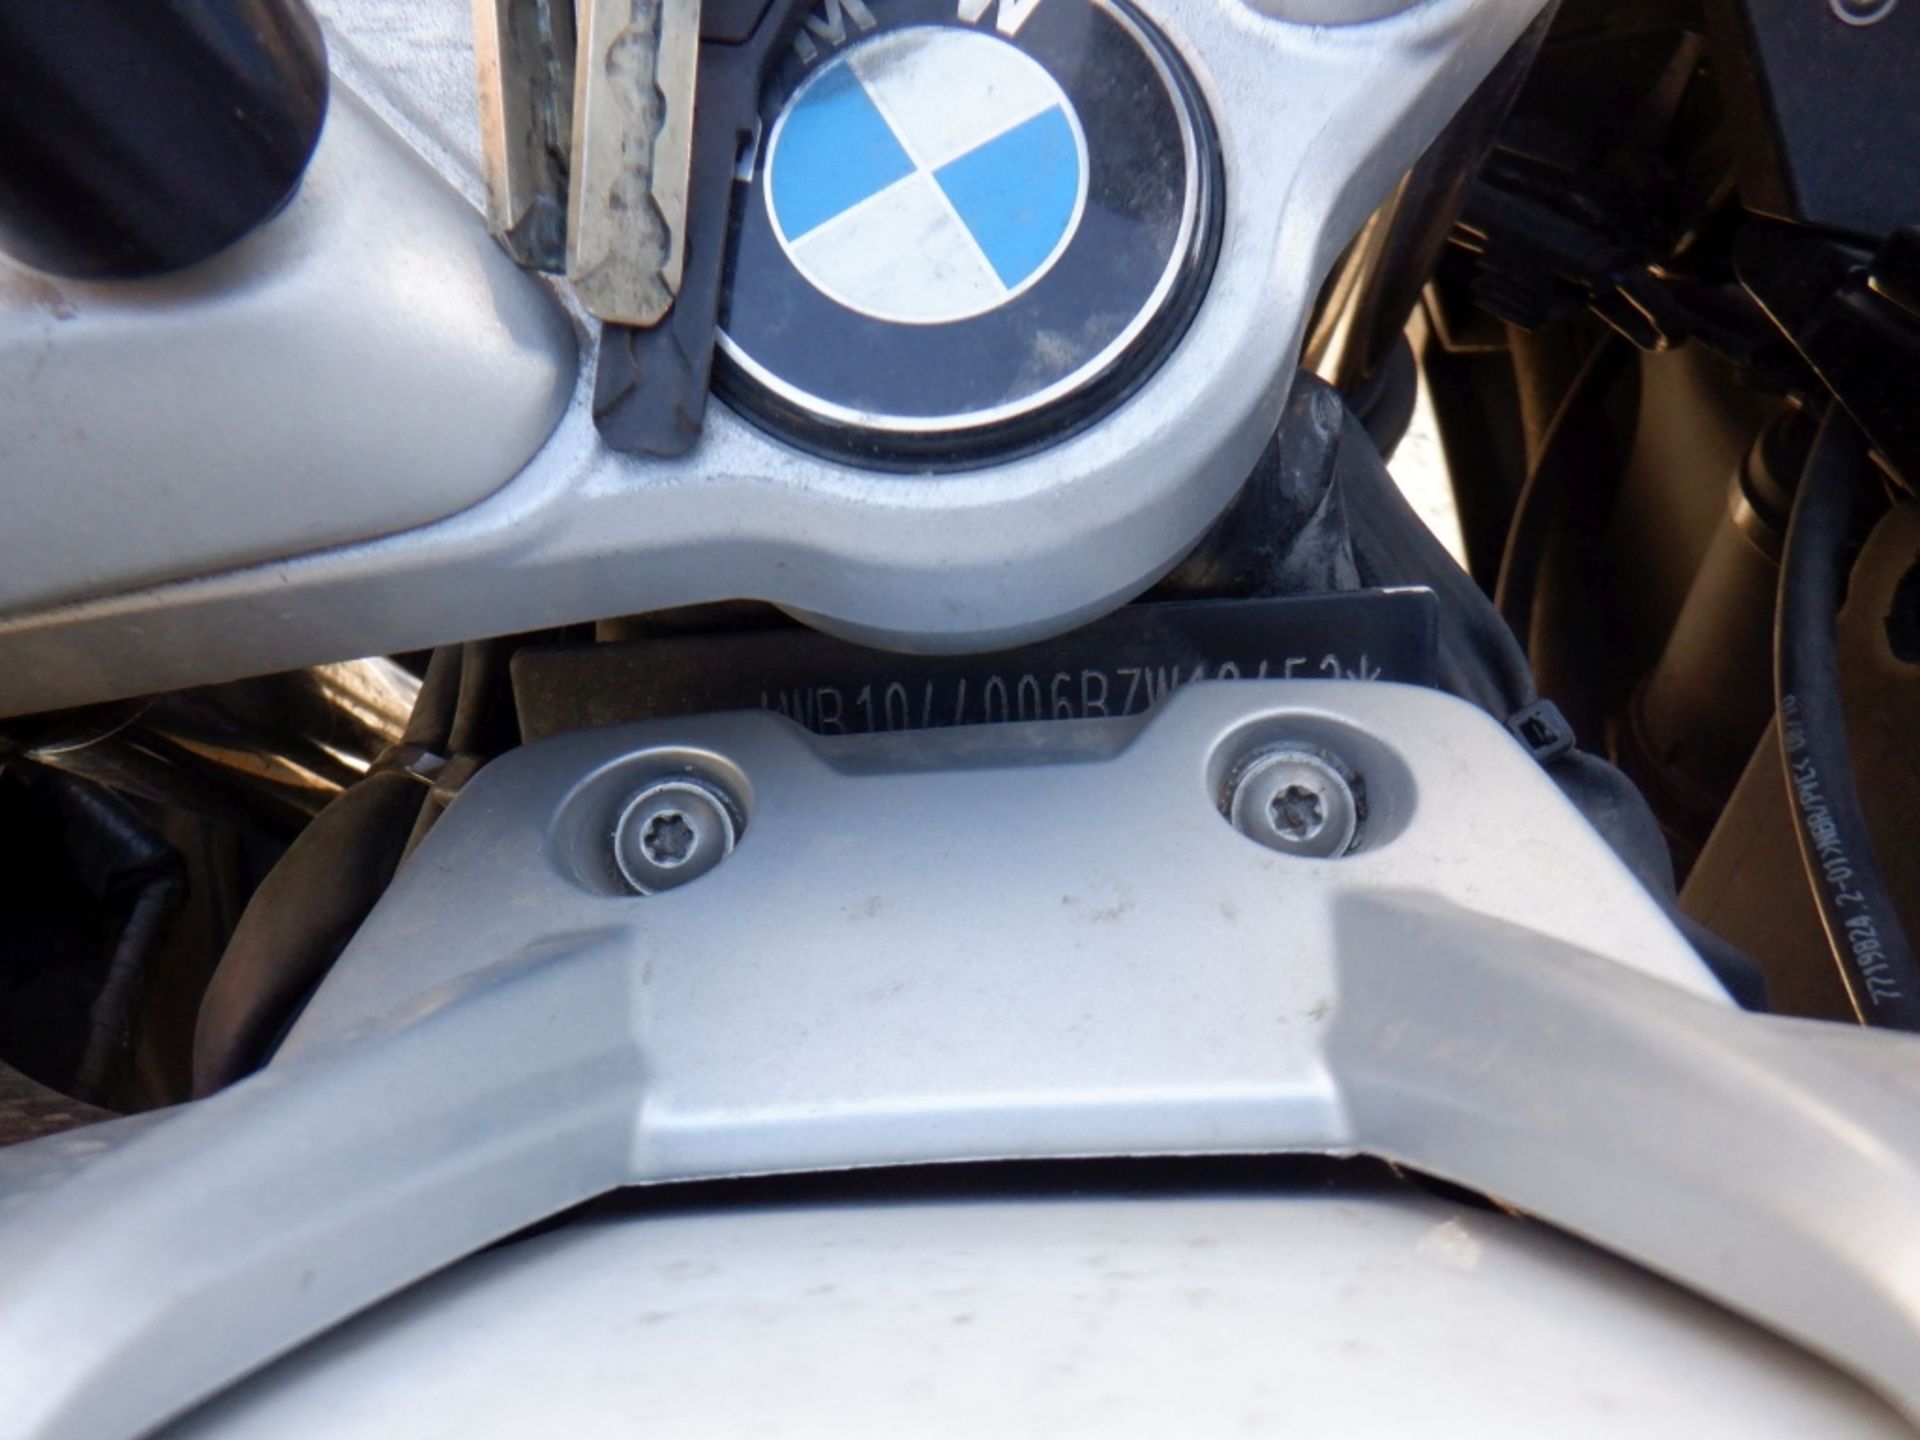 2011 BMW R1200 Motorcycle, - Image 7 of 7